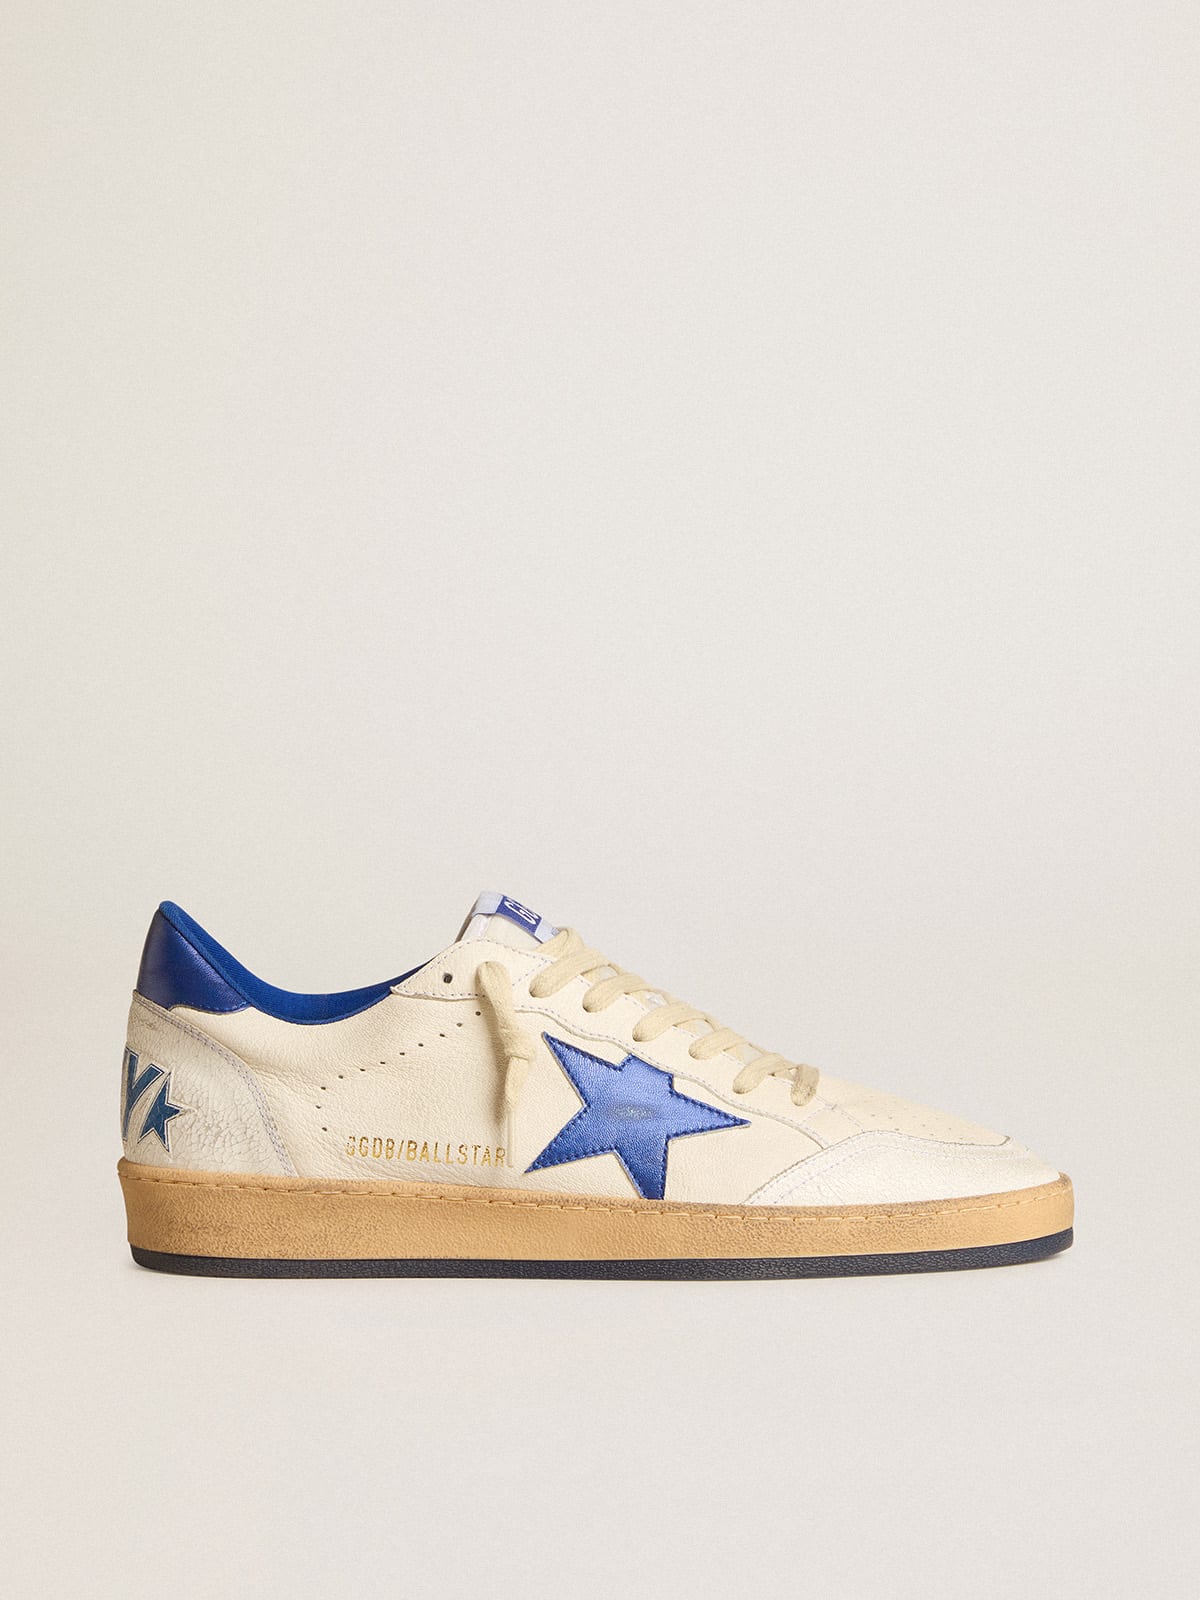 Ball Star Wishes in white nappa leather with a bright blue star and ...